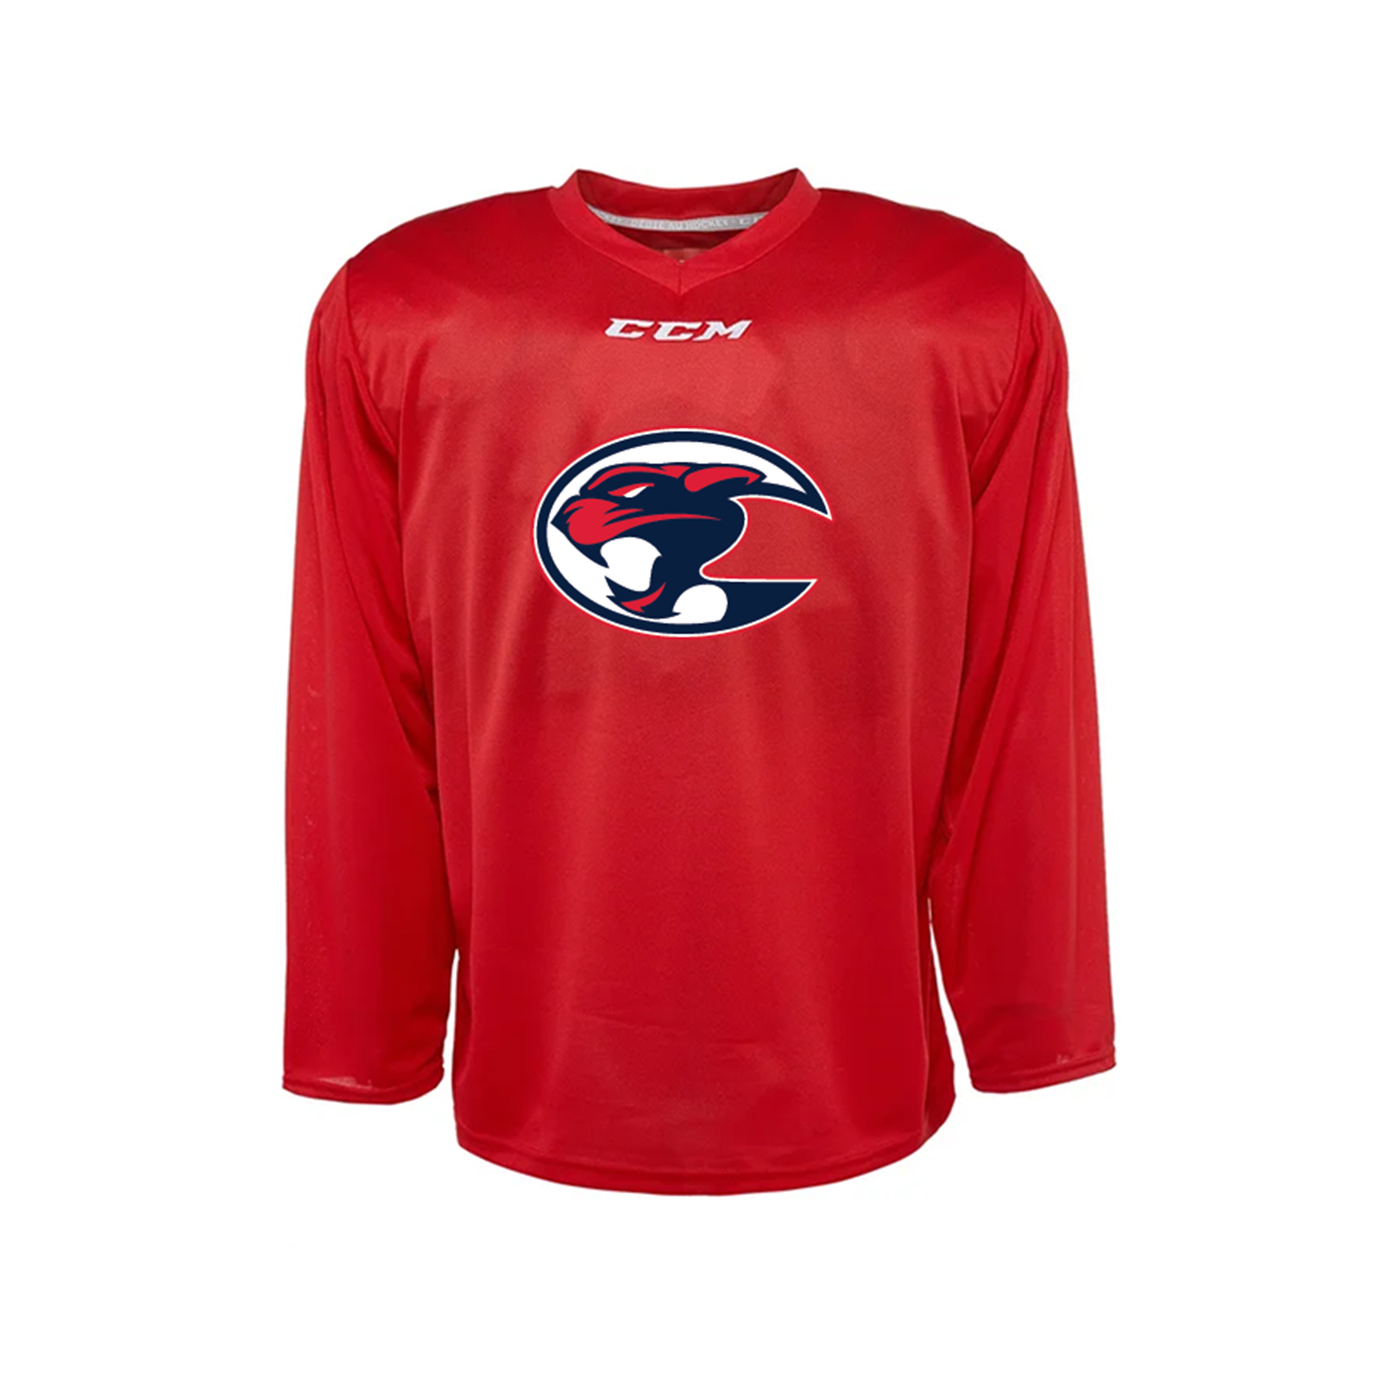 Southwest Red Practice Jersey